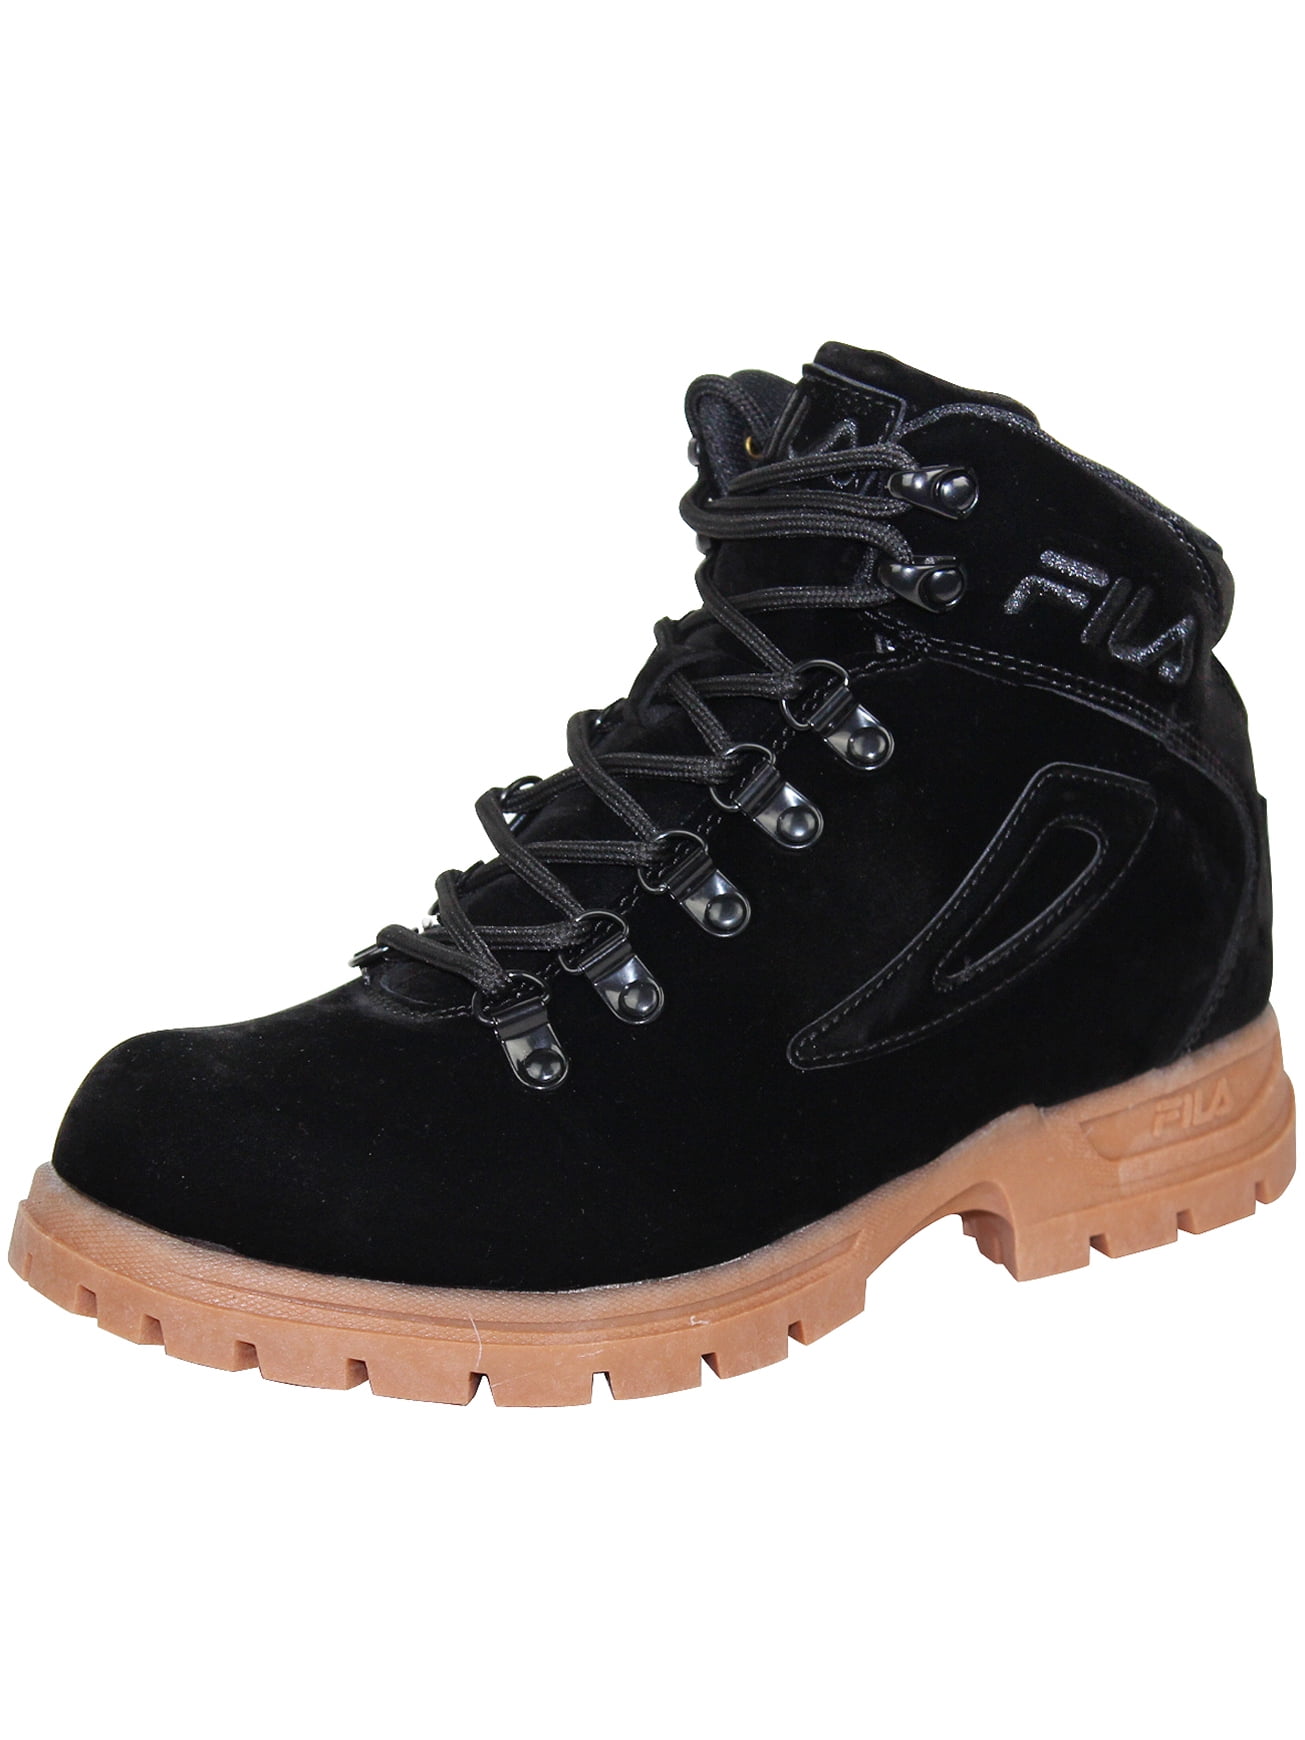 Hiking Boots Outdoor Padded Shoes Black 